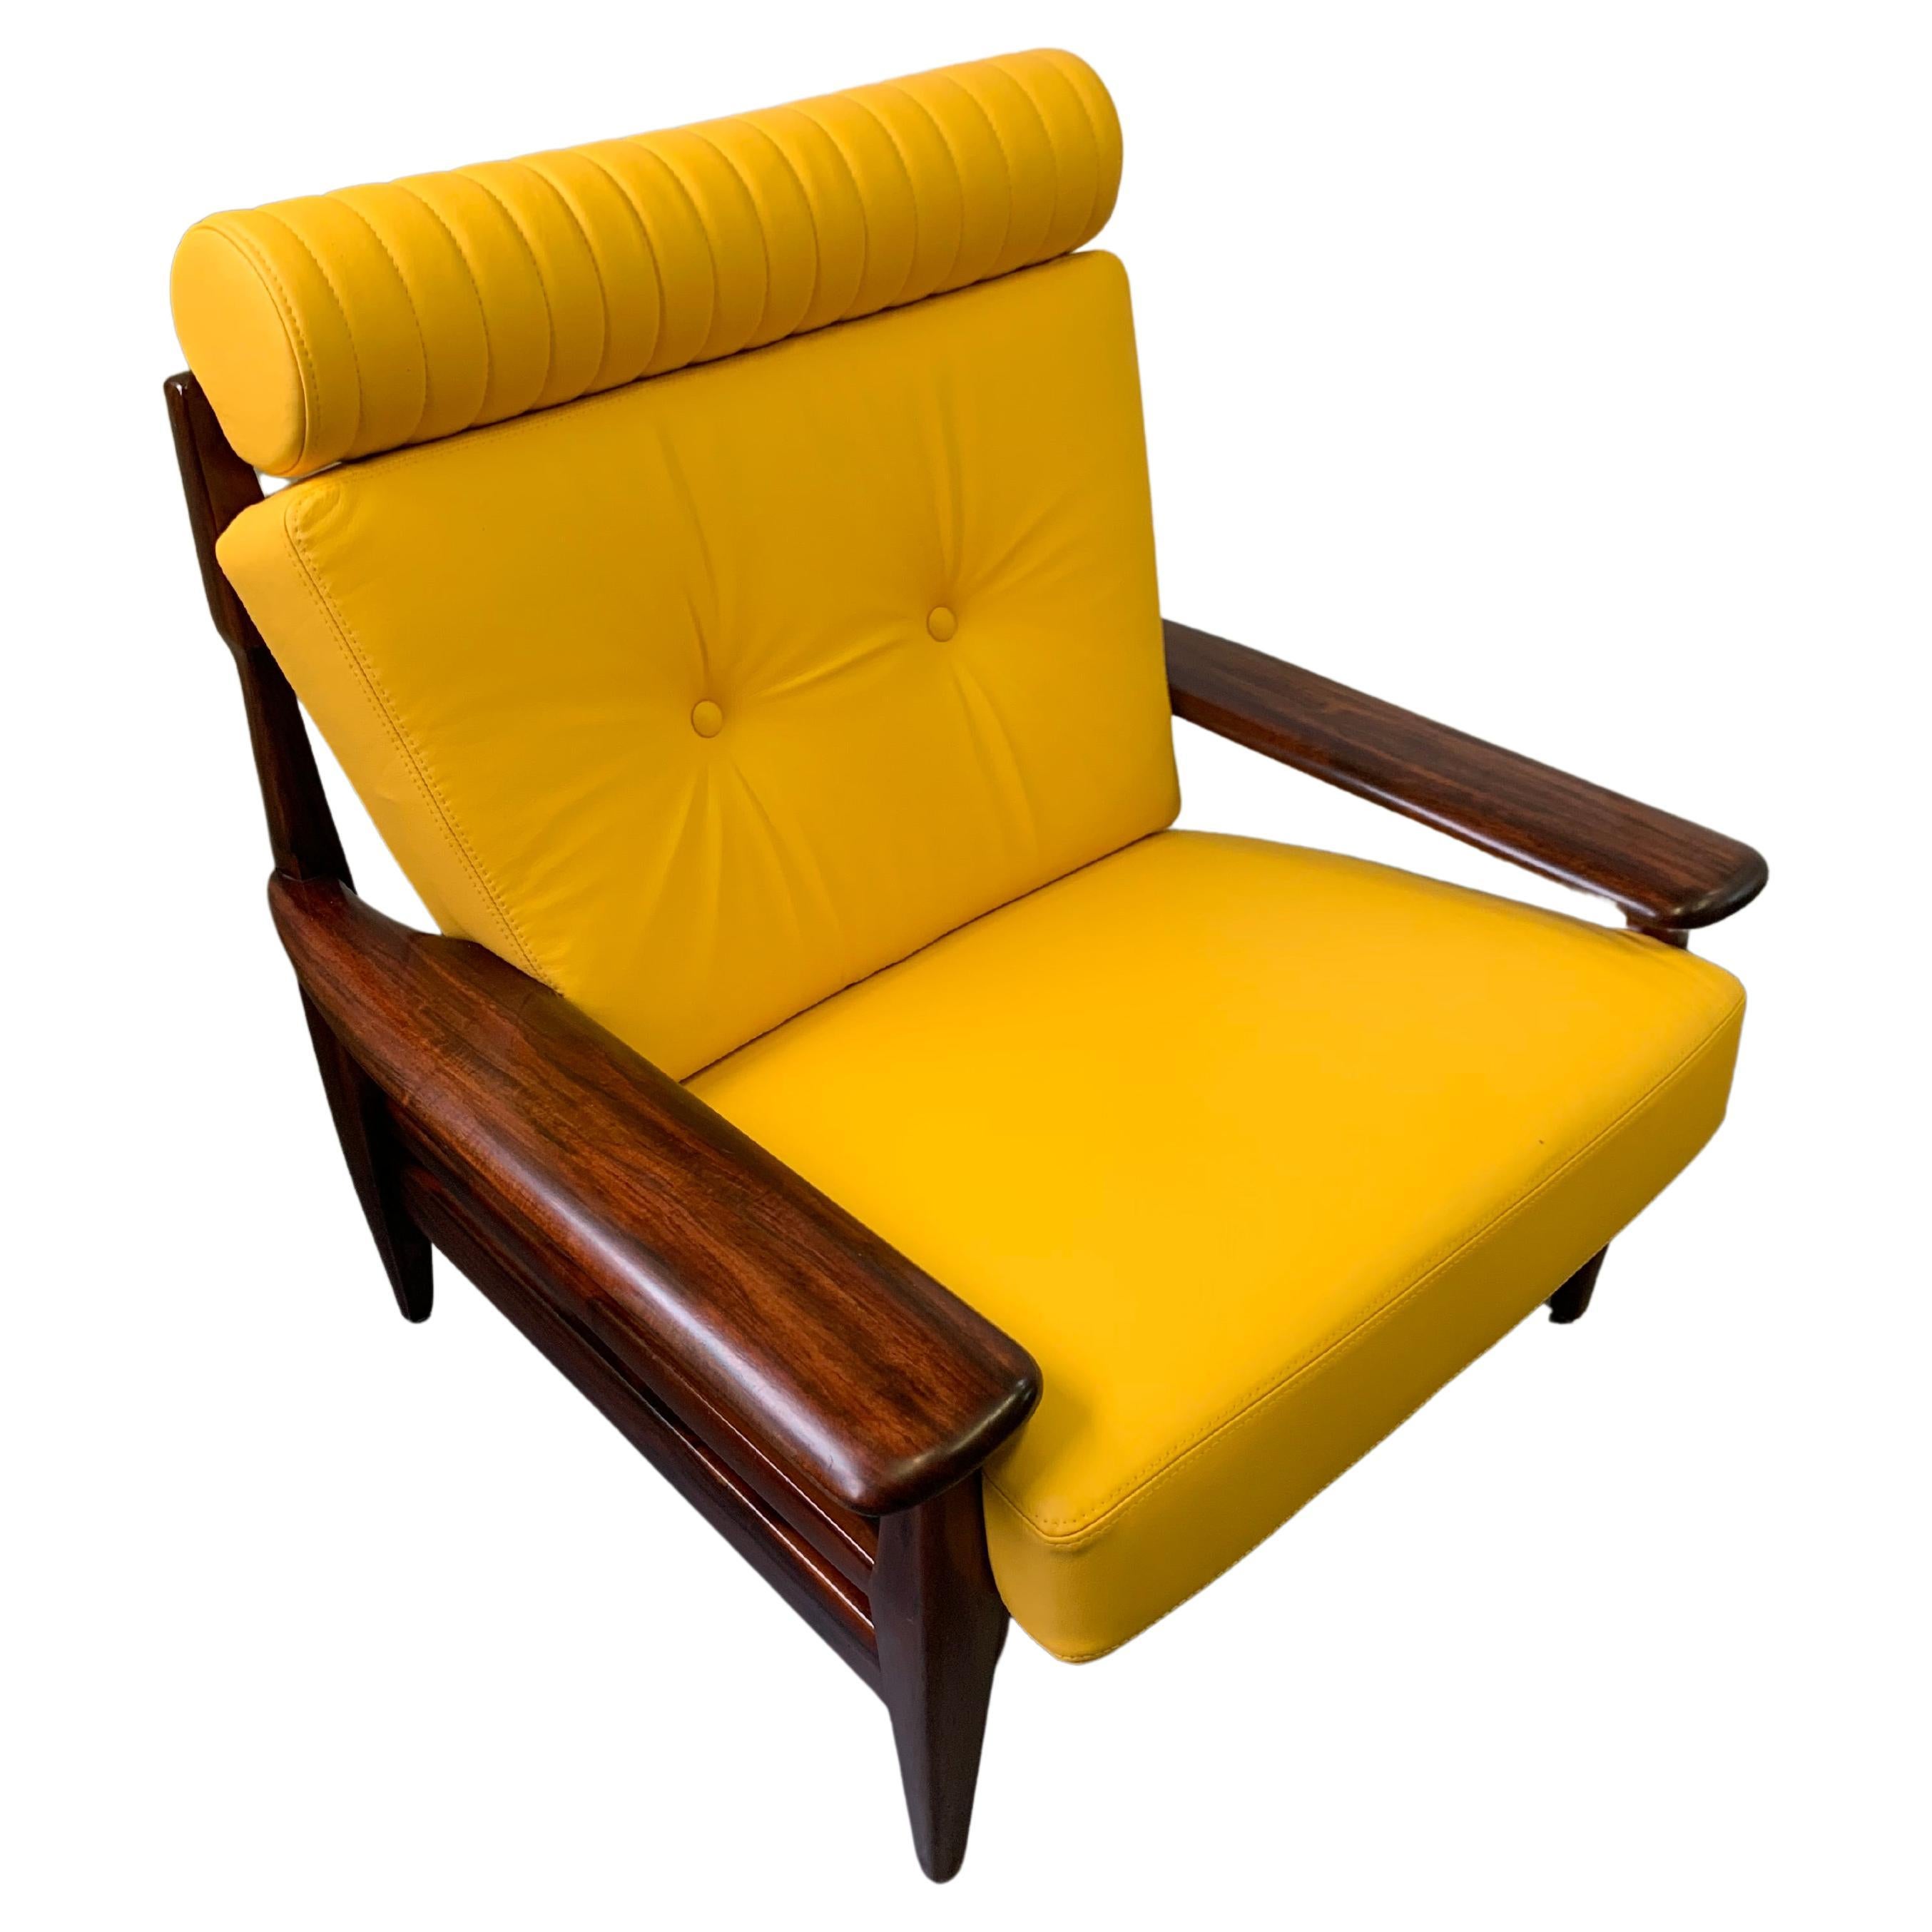 Brazilian Brutalist Rosewood and Leather Lounge Chair by Jean Gillon